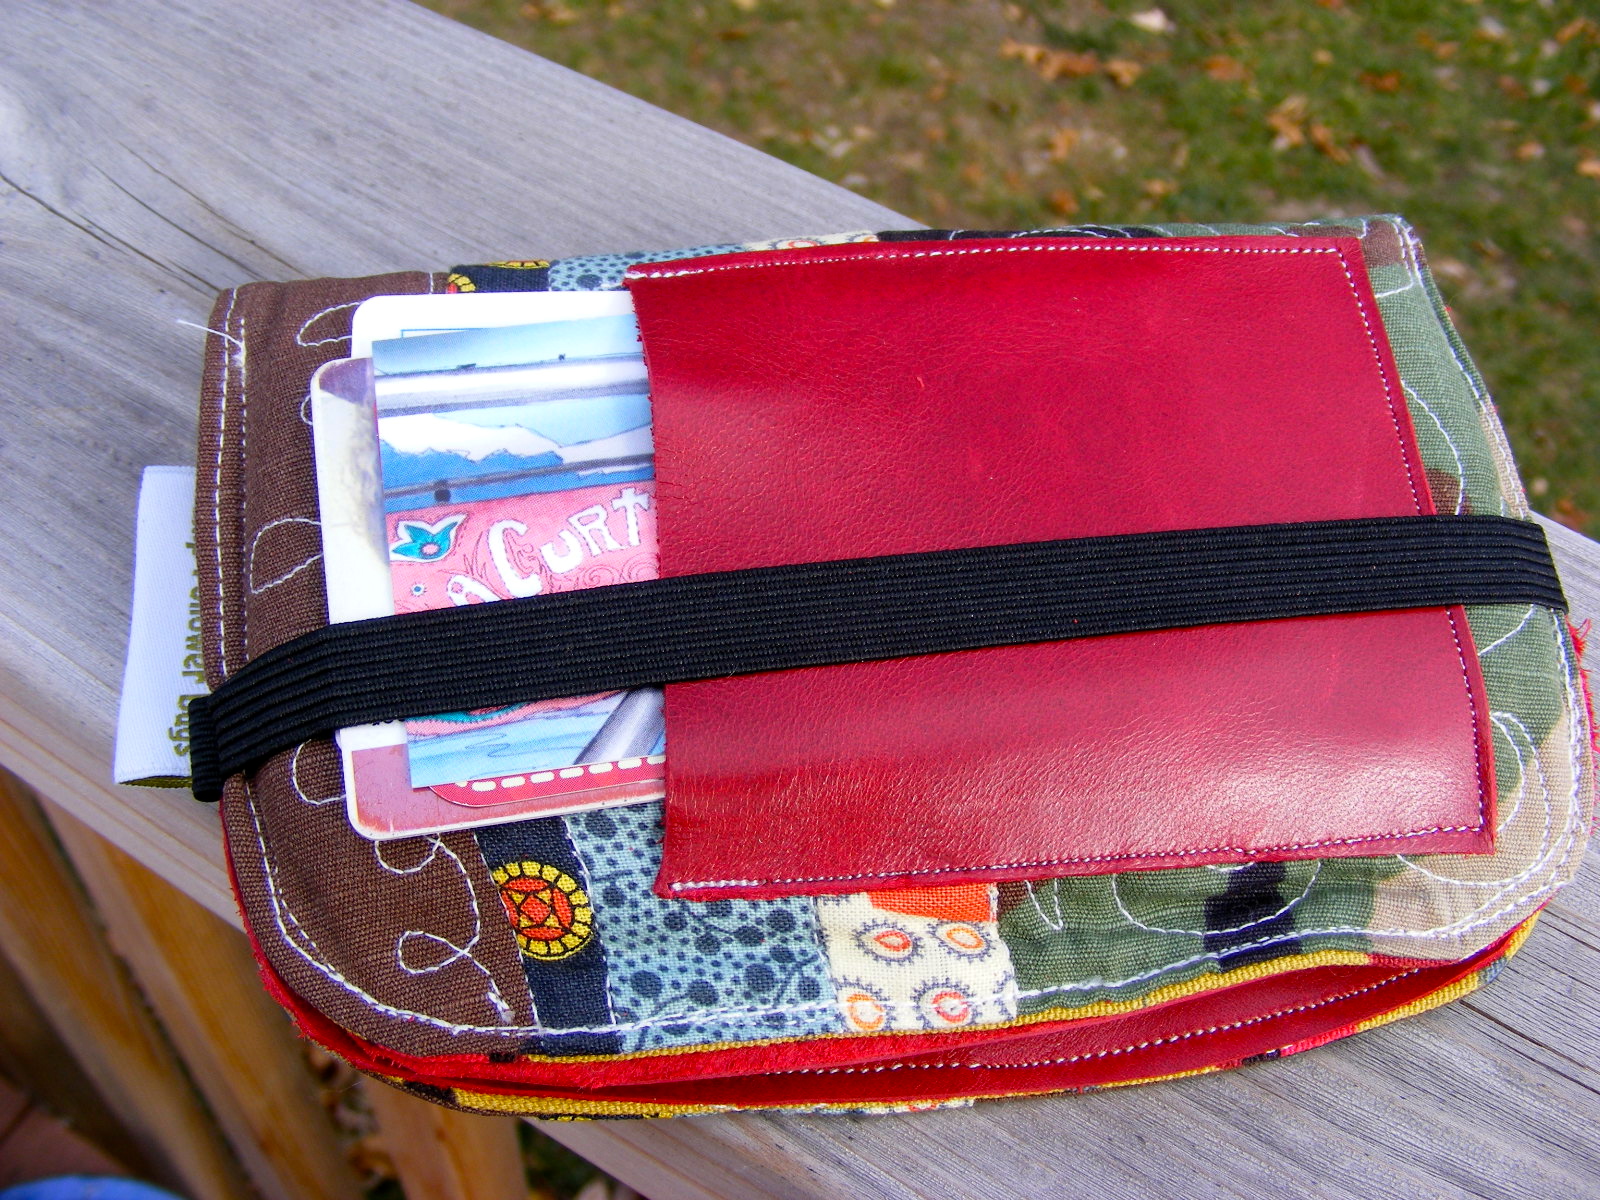 Camp Follower Bags and Quilts: New Technology wallet